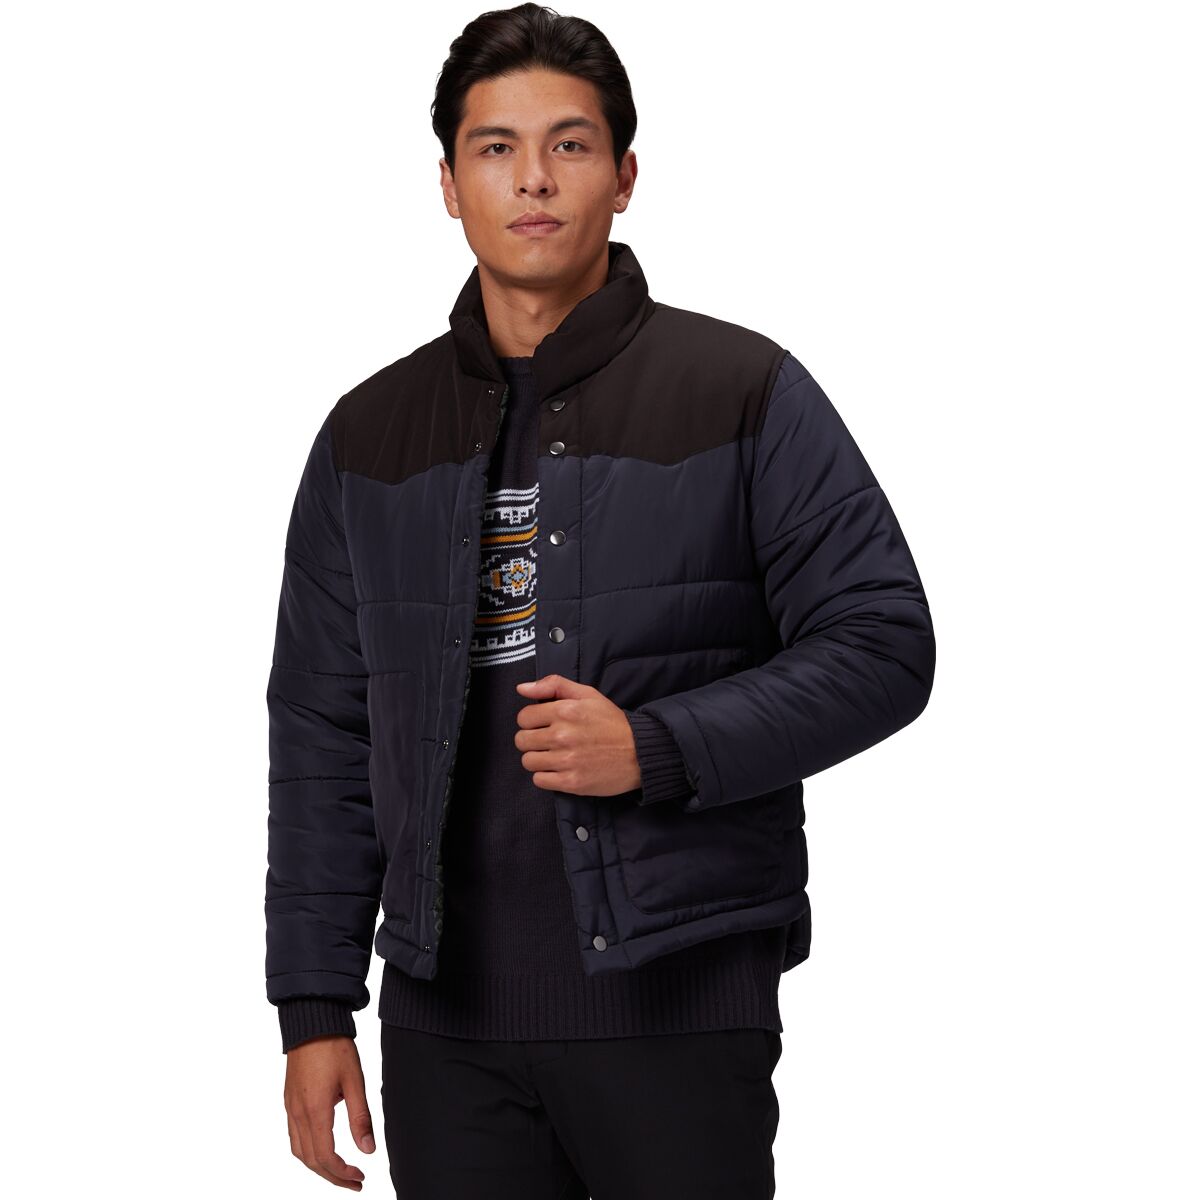 Stoic Plains Insulated Jacket - Men's